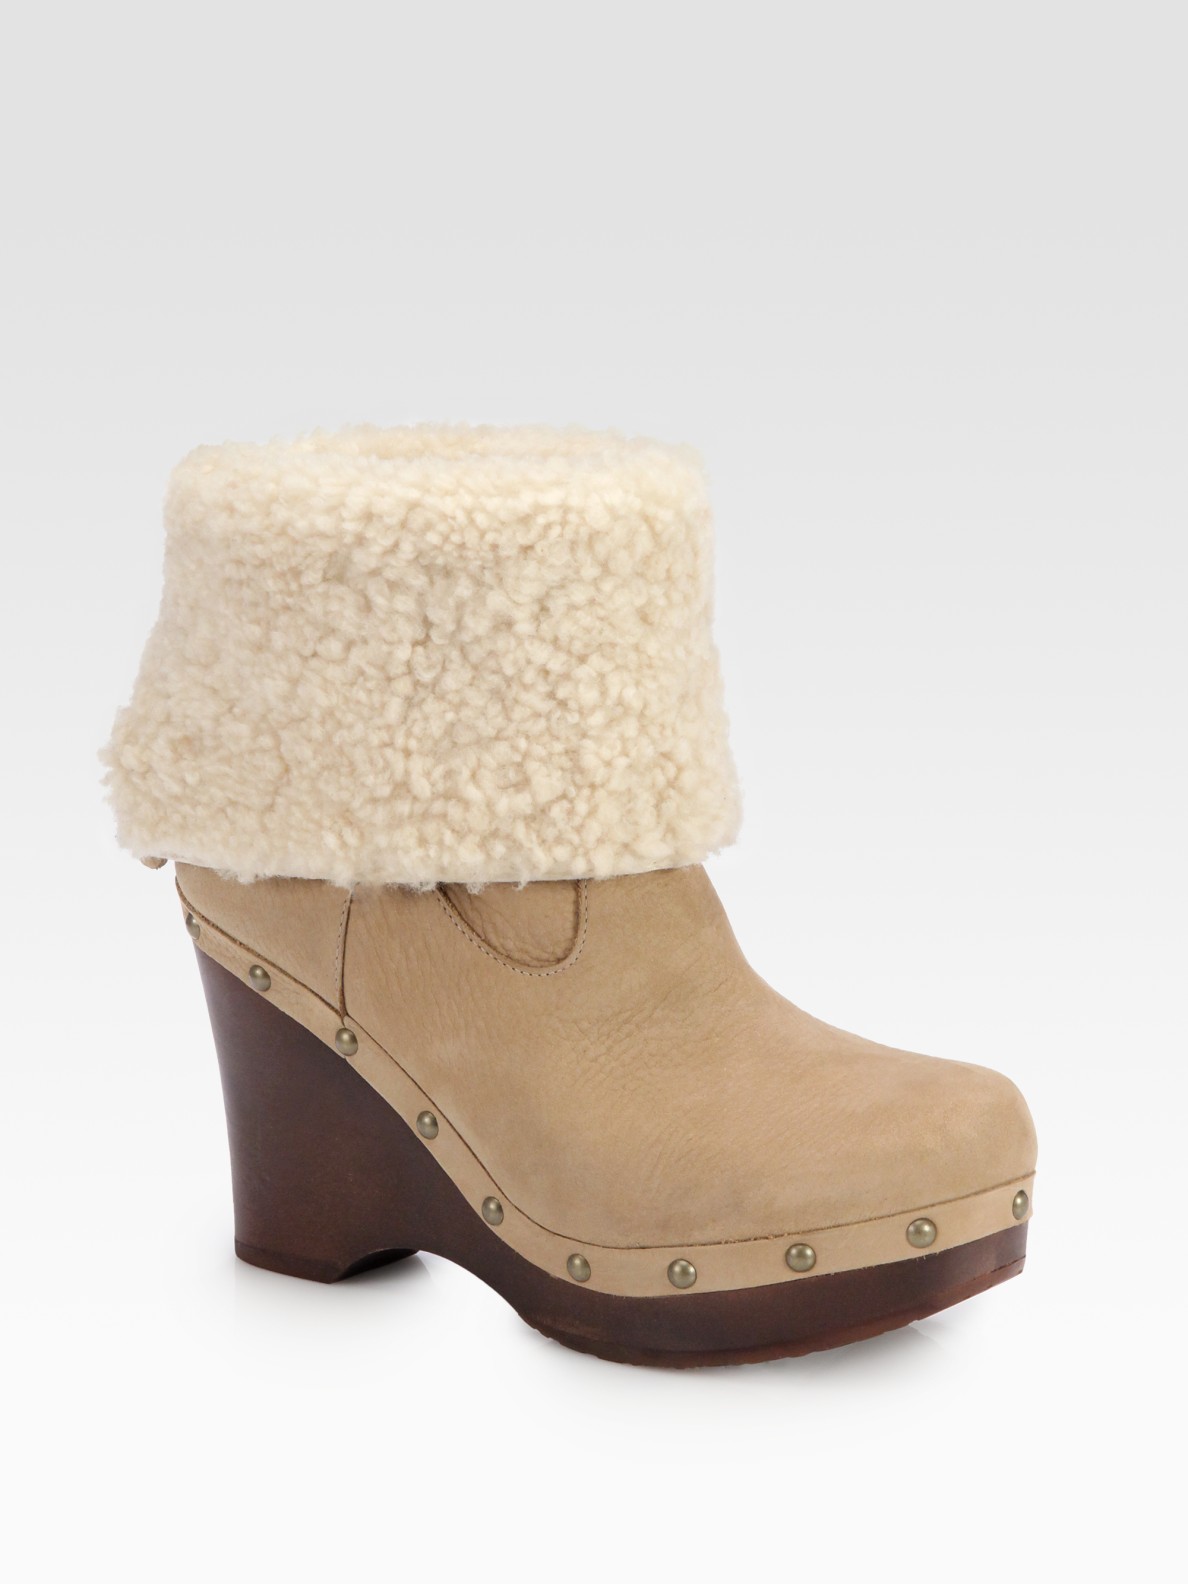 Ugg Carnagie Leather Shearling Clog Ankle Boots in Beige (mushroom) | Lyst